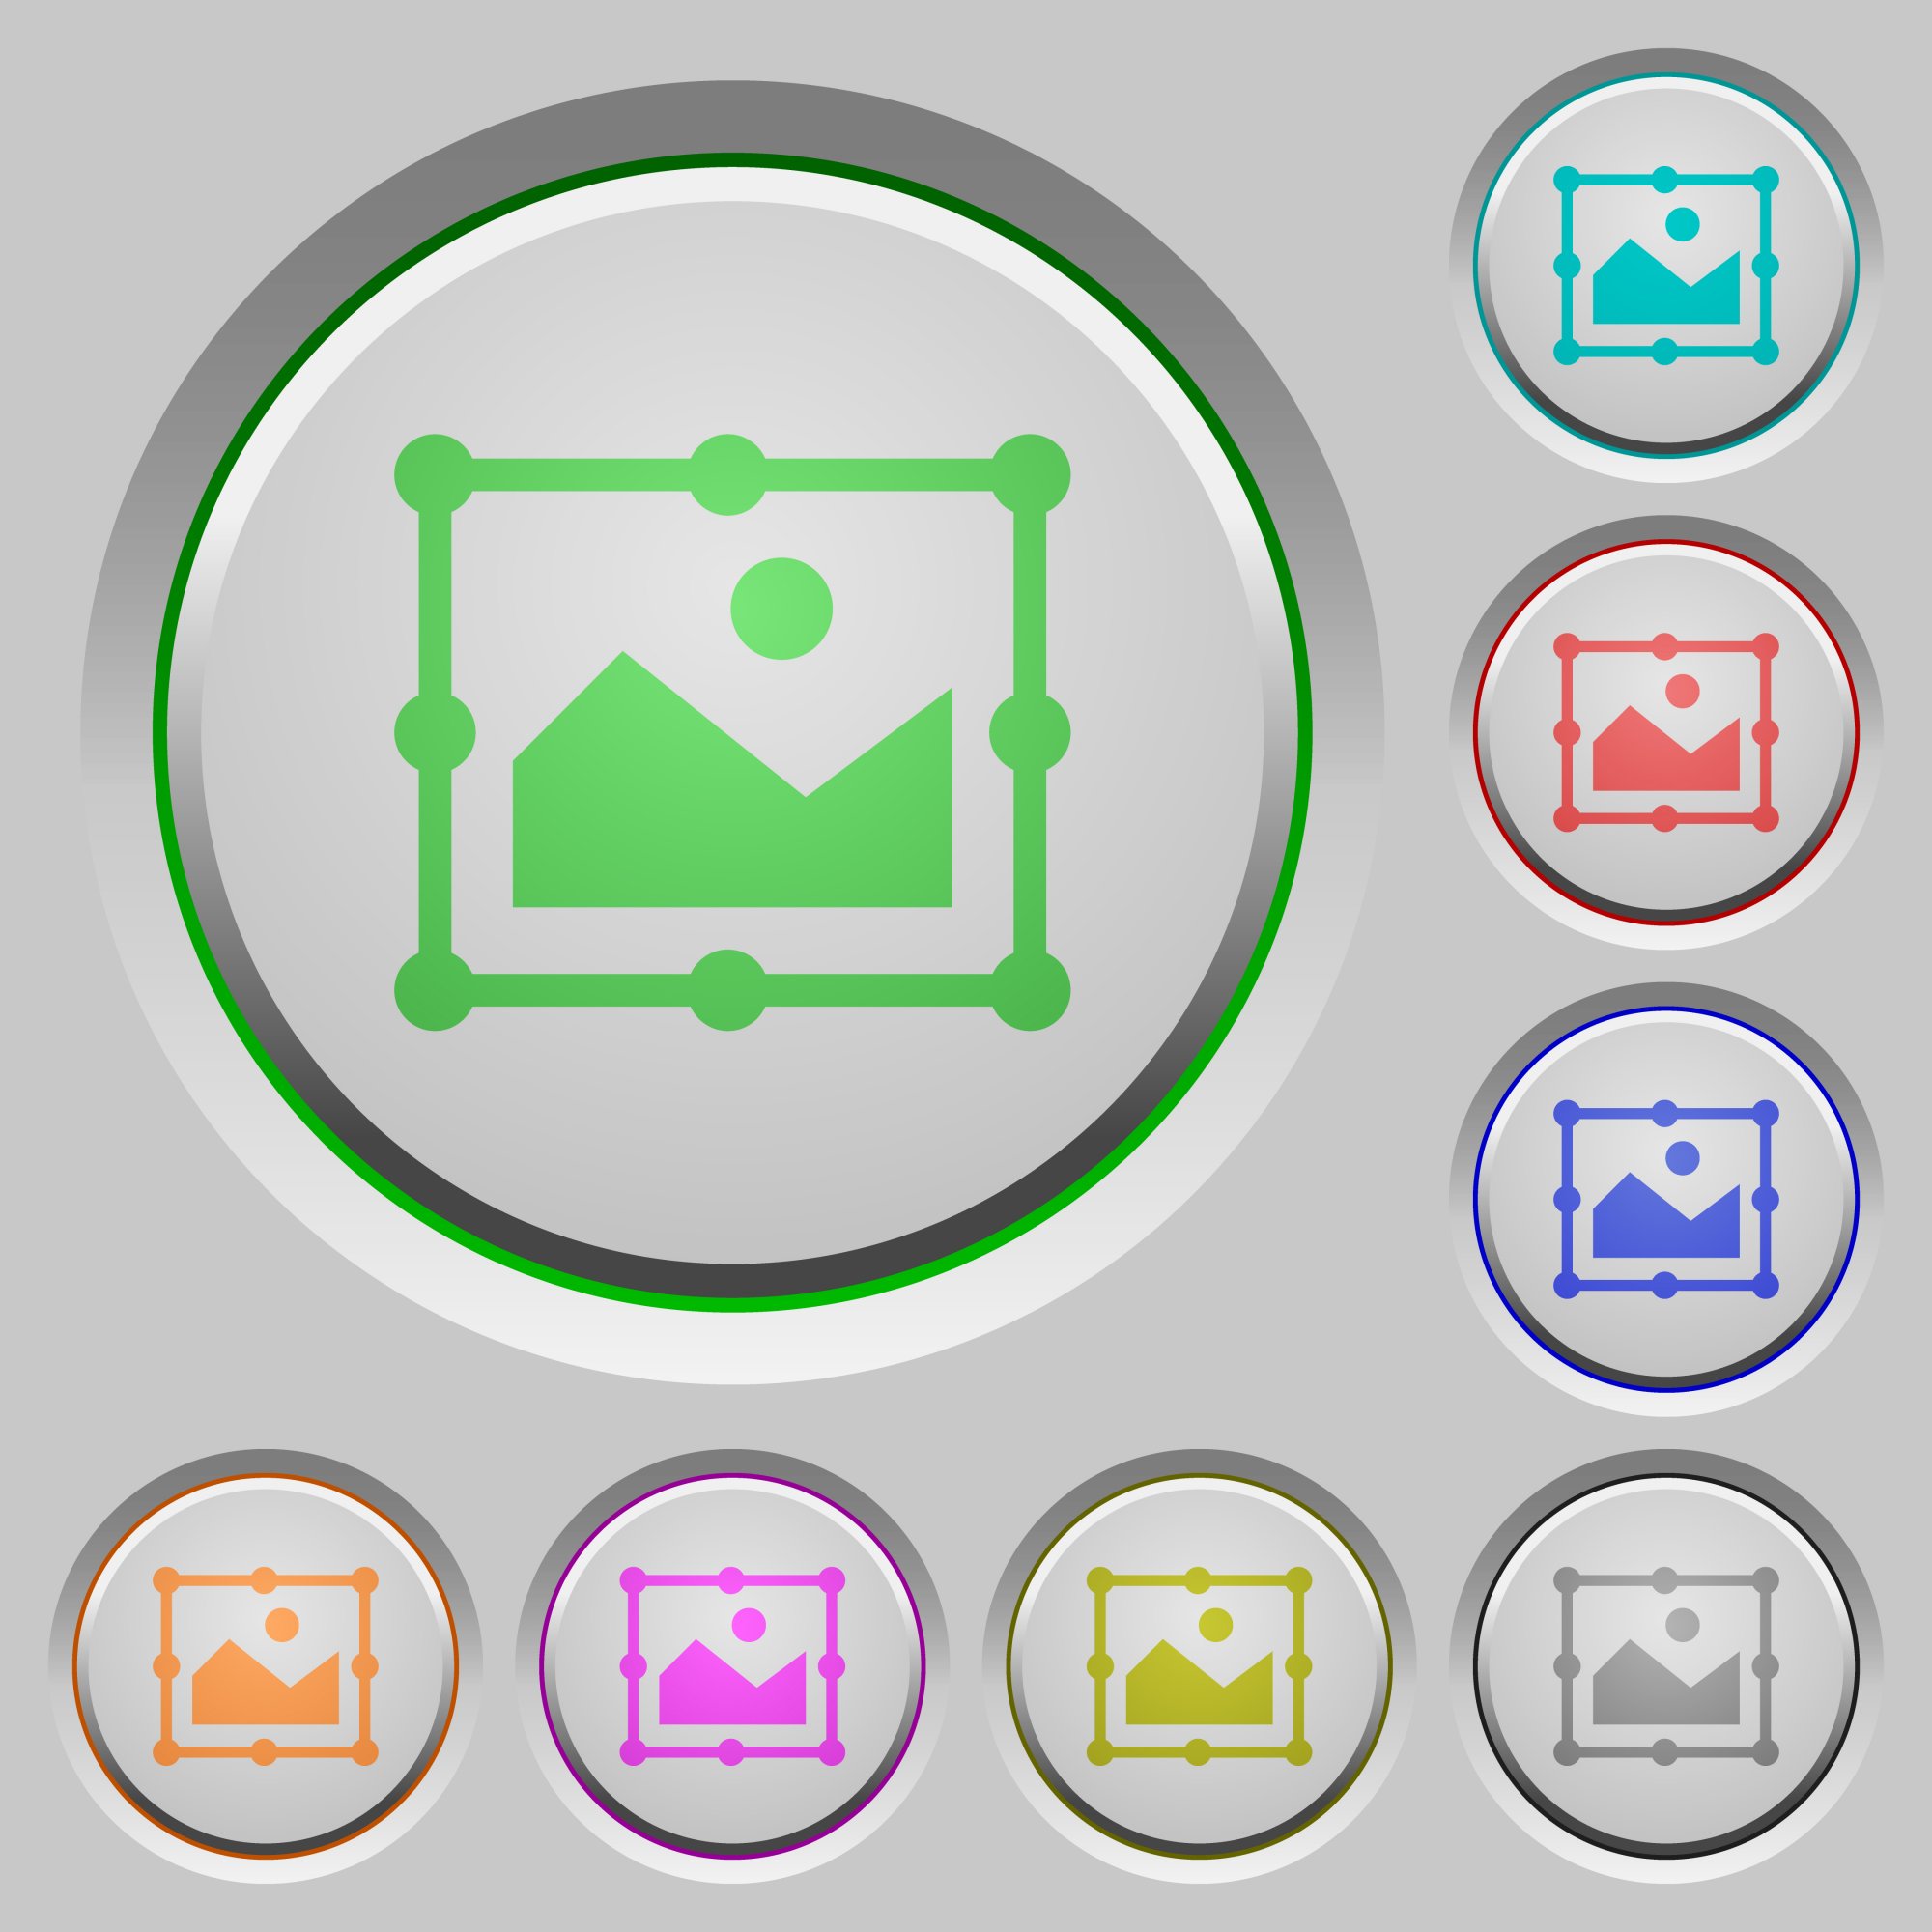 Image free transform color icons on sunk push buttons - Free image